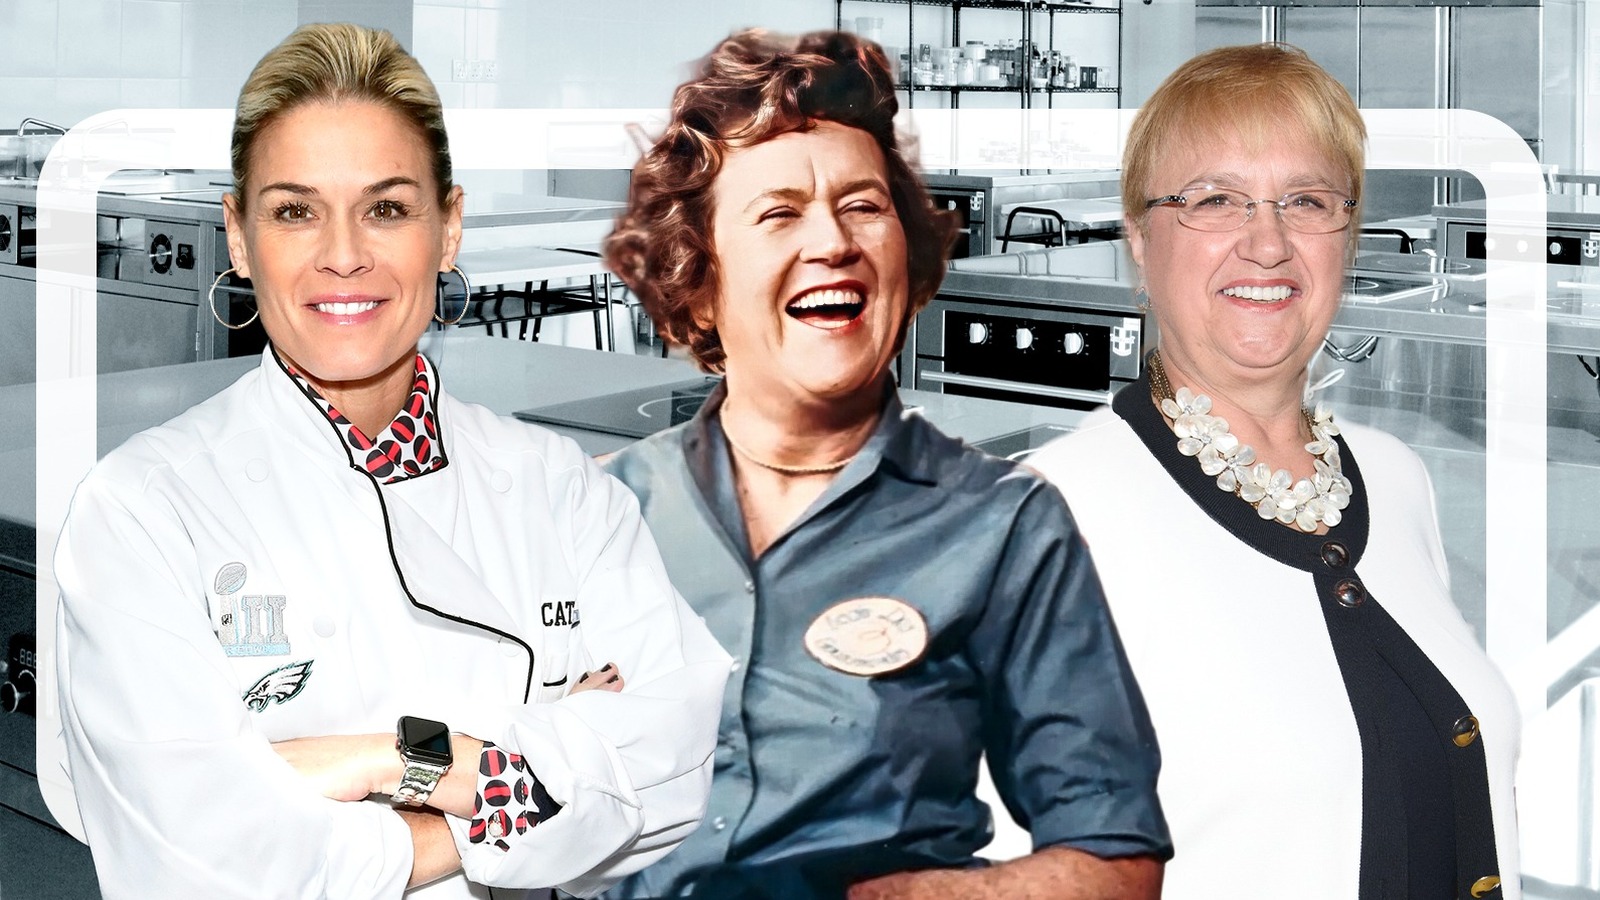 Female Chefs Are Still Rare, And We’re Over The Diversity Problem In Professional Kitchens – Mashed